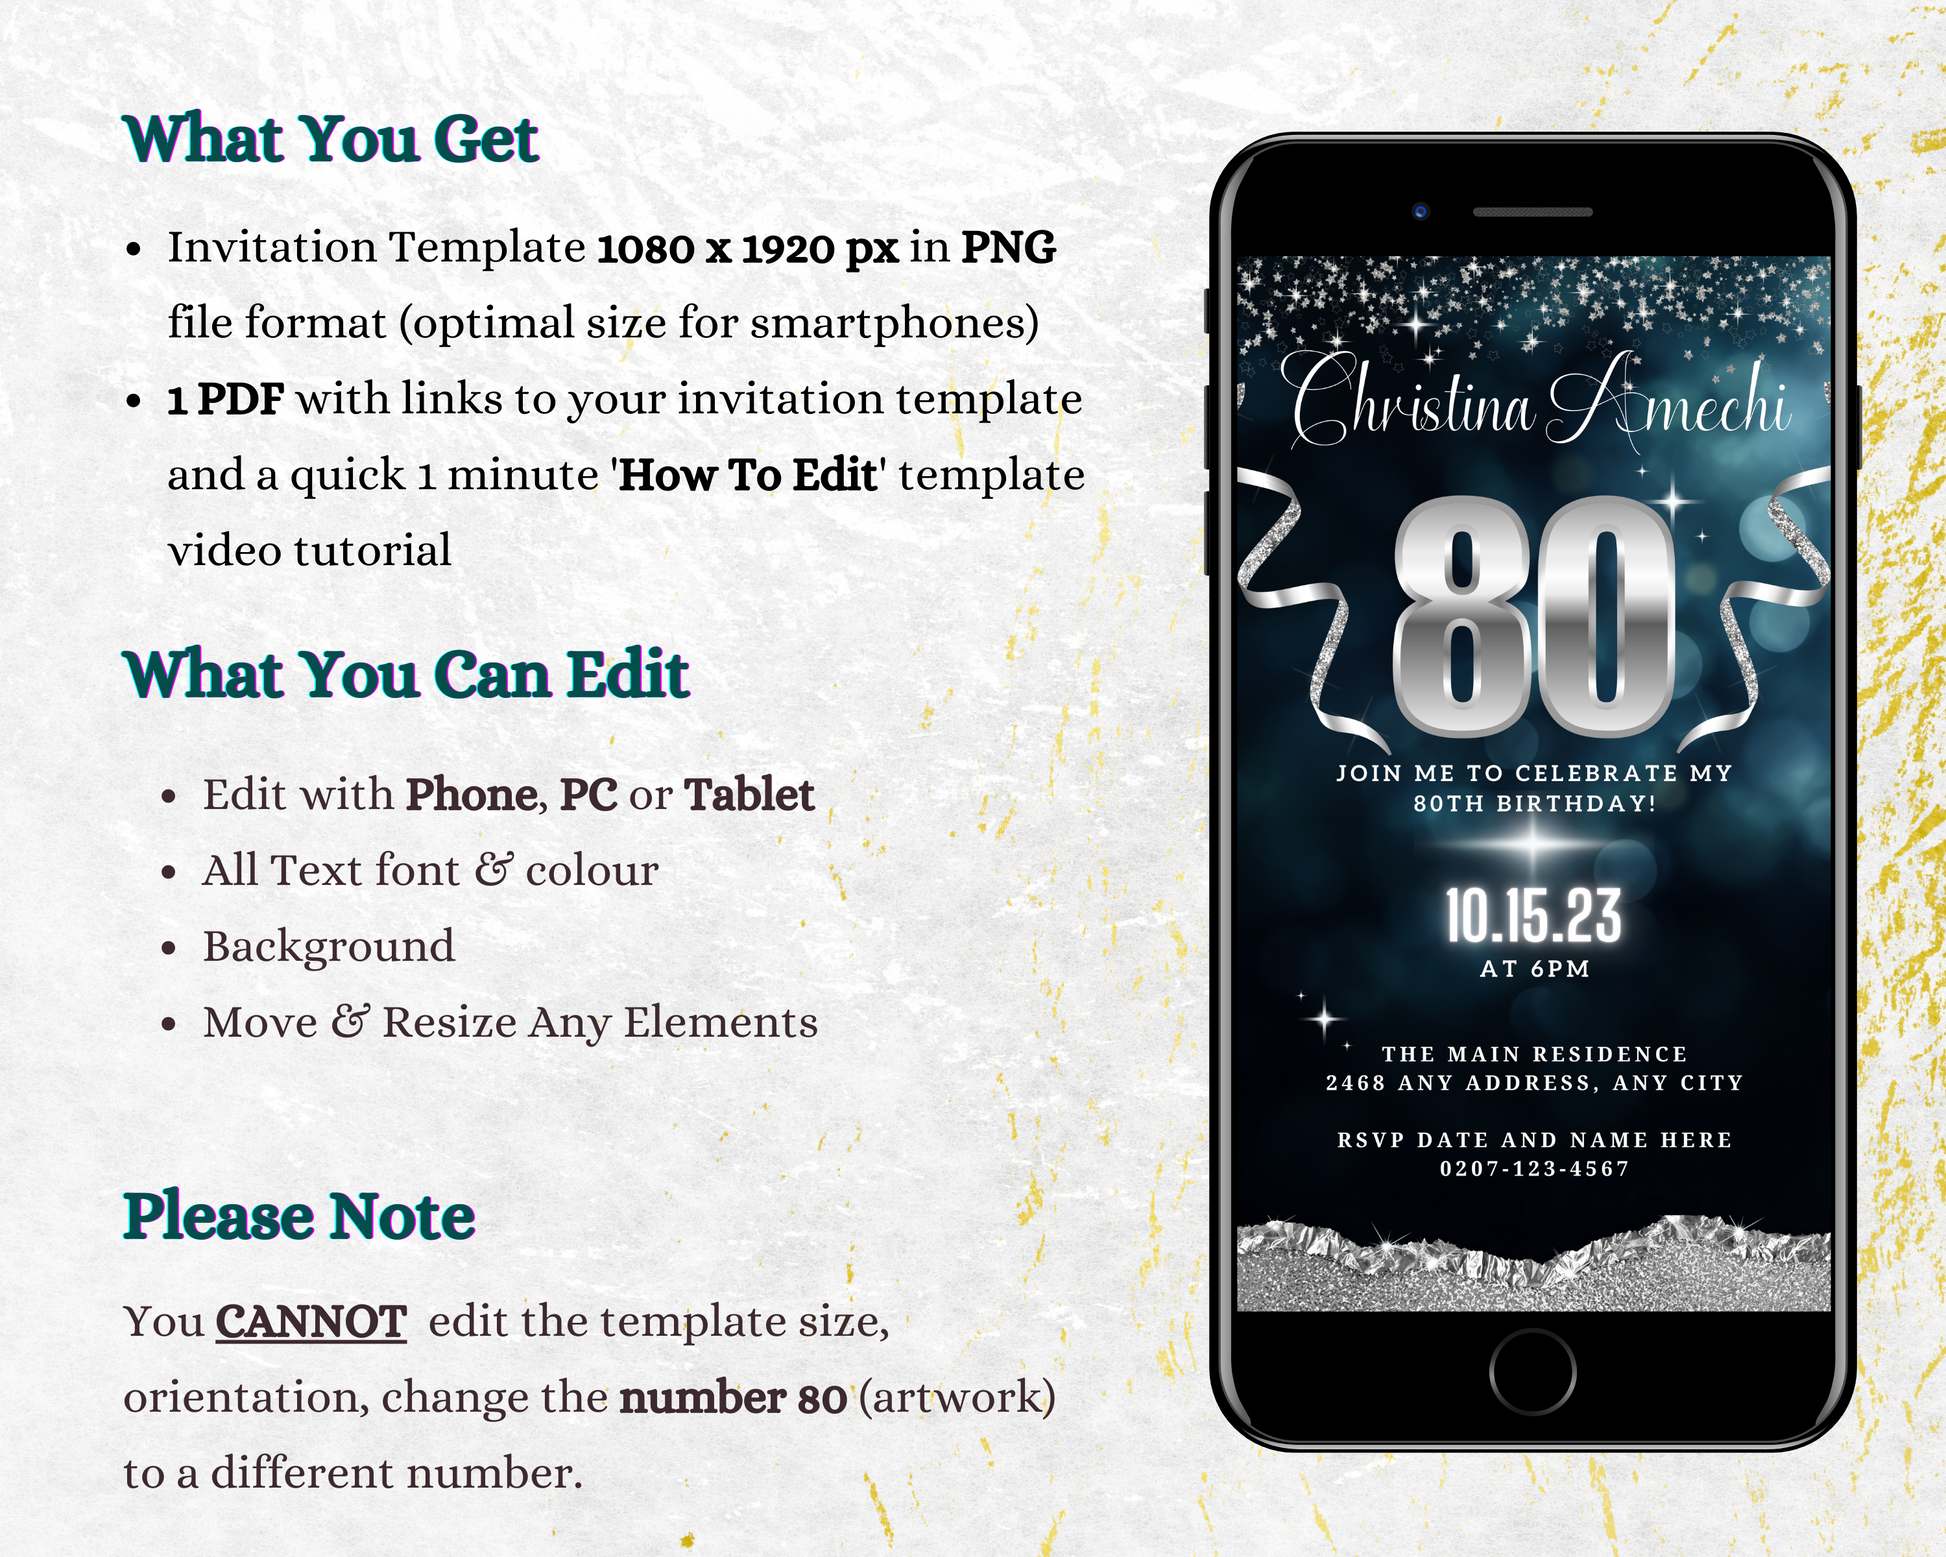 Customisable Digital Navy Blue Silver Glitter 80th Birthday Evite displayed on a smartphone screen. Includes editable text and design elements for personalizing event details via Canva.